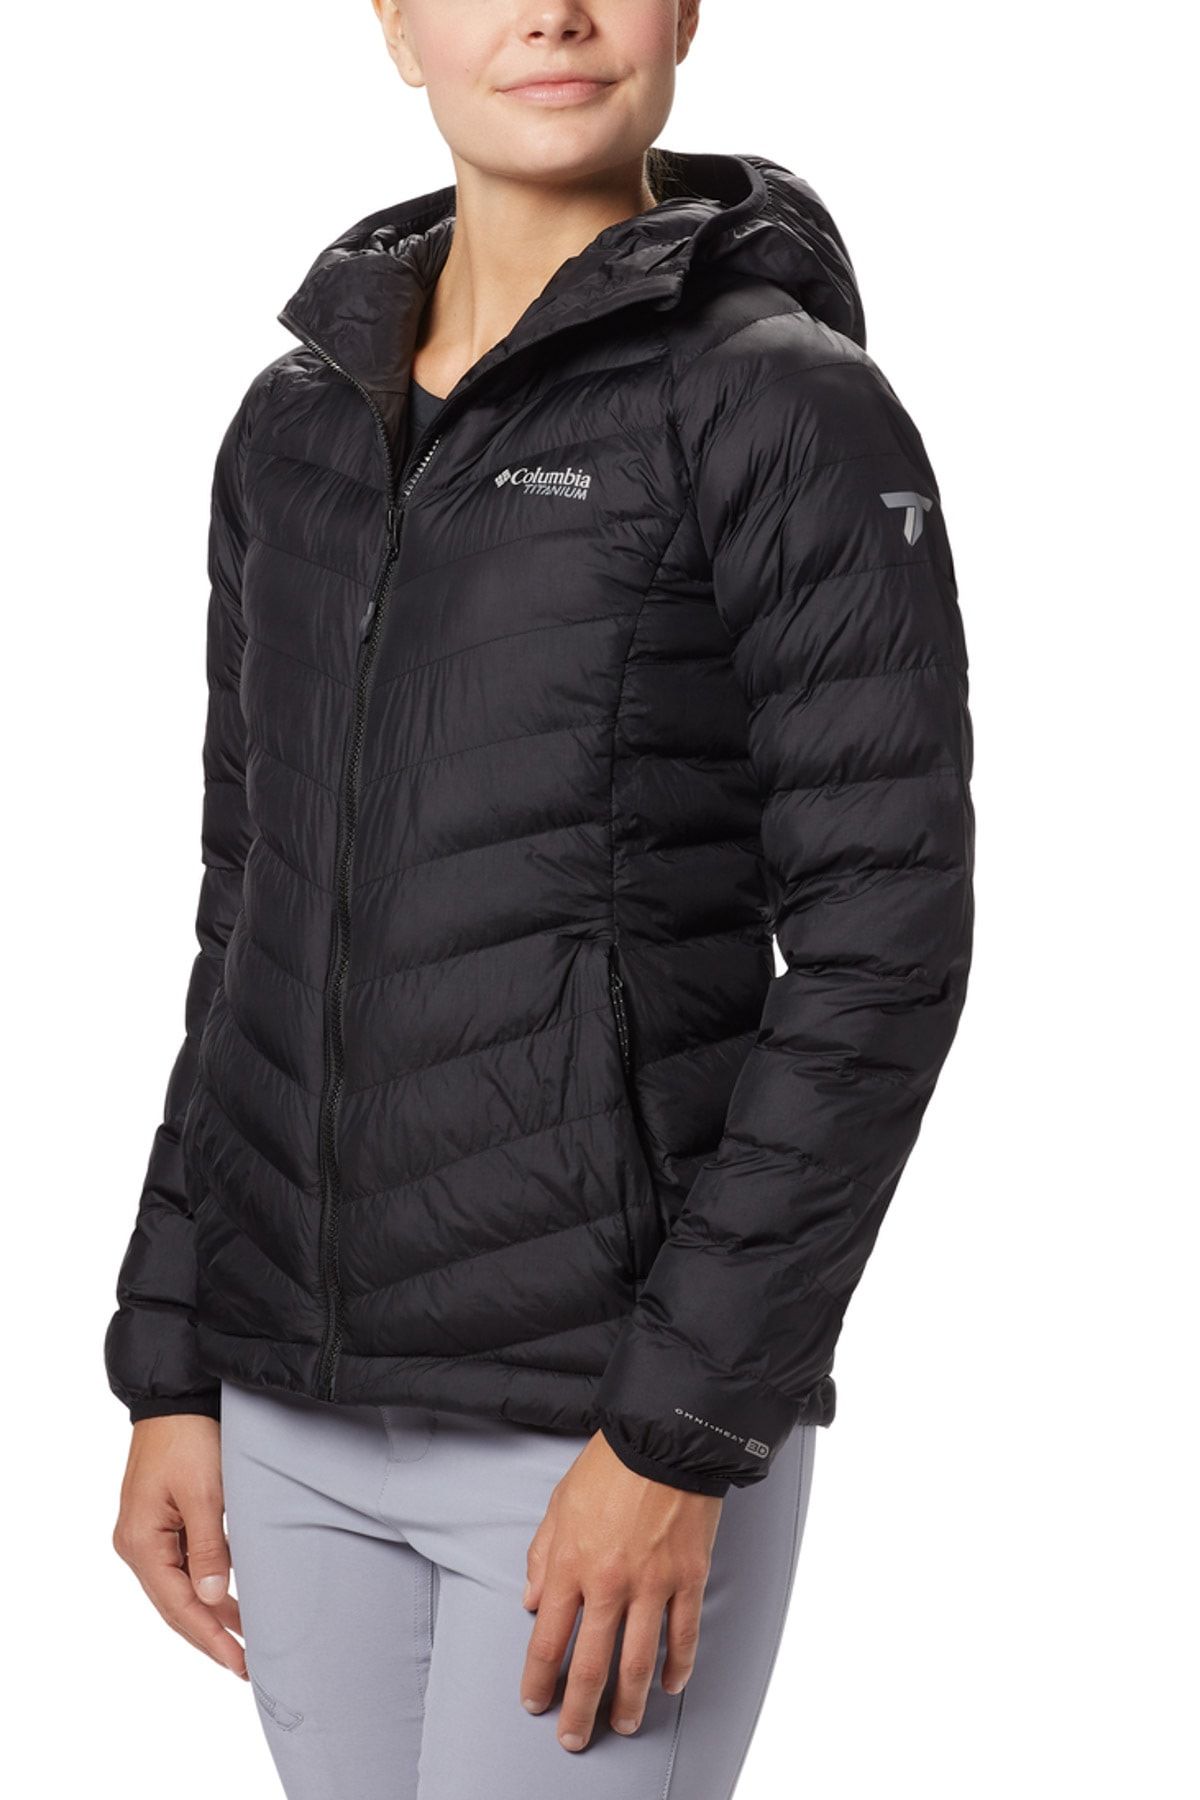 Columbia Snow Country Hooded Jacket